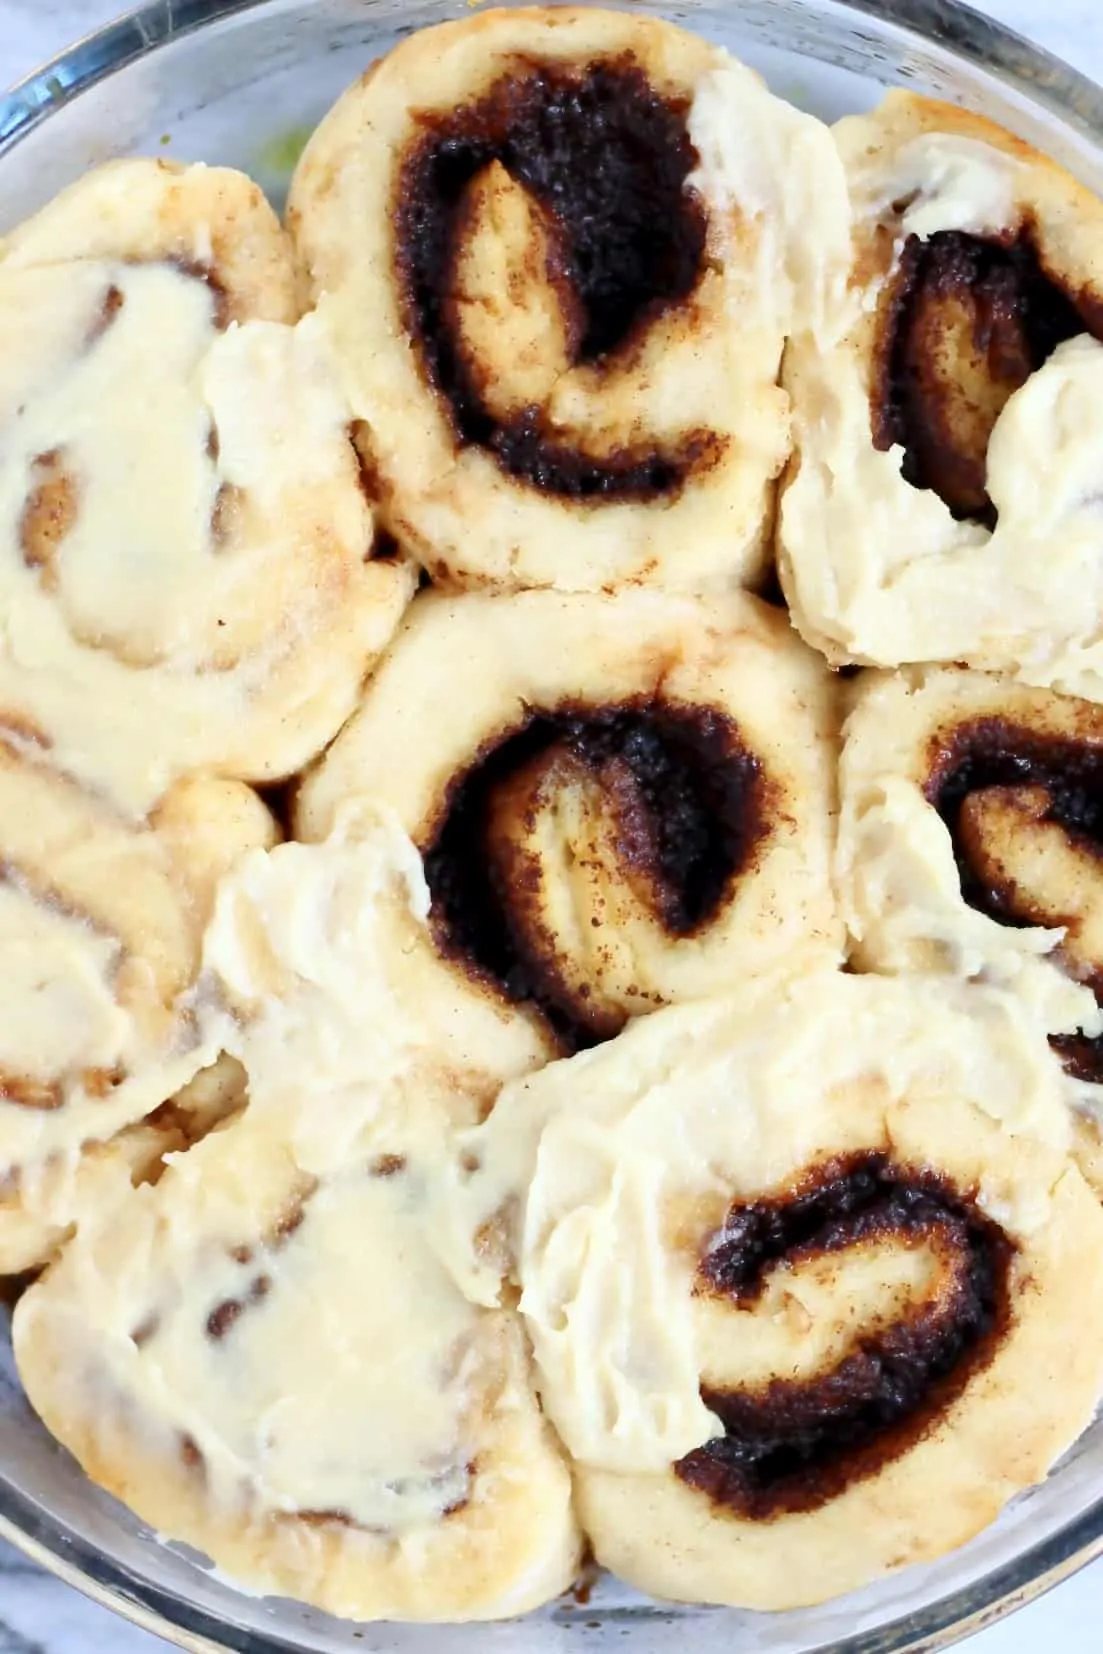 Seven gluten-free vegan cinnamon rolls in a round baking dish, topped with vegan cream cheese frosting